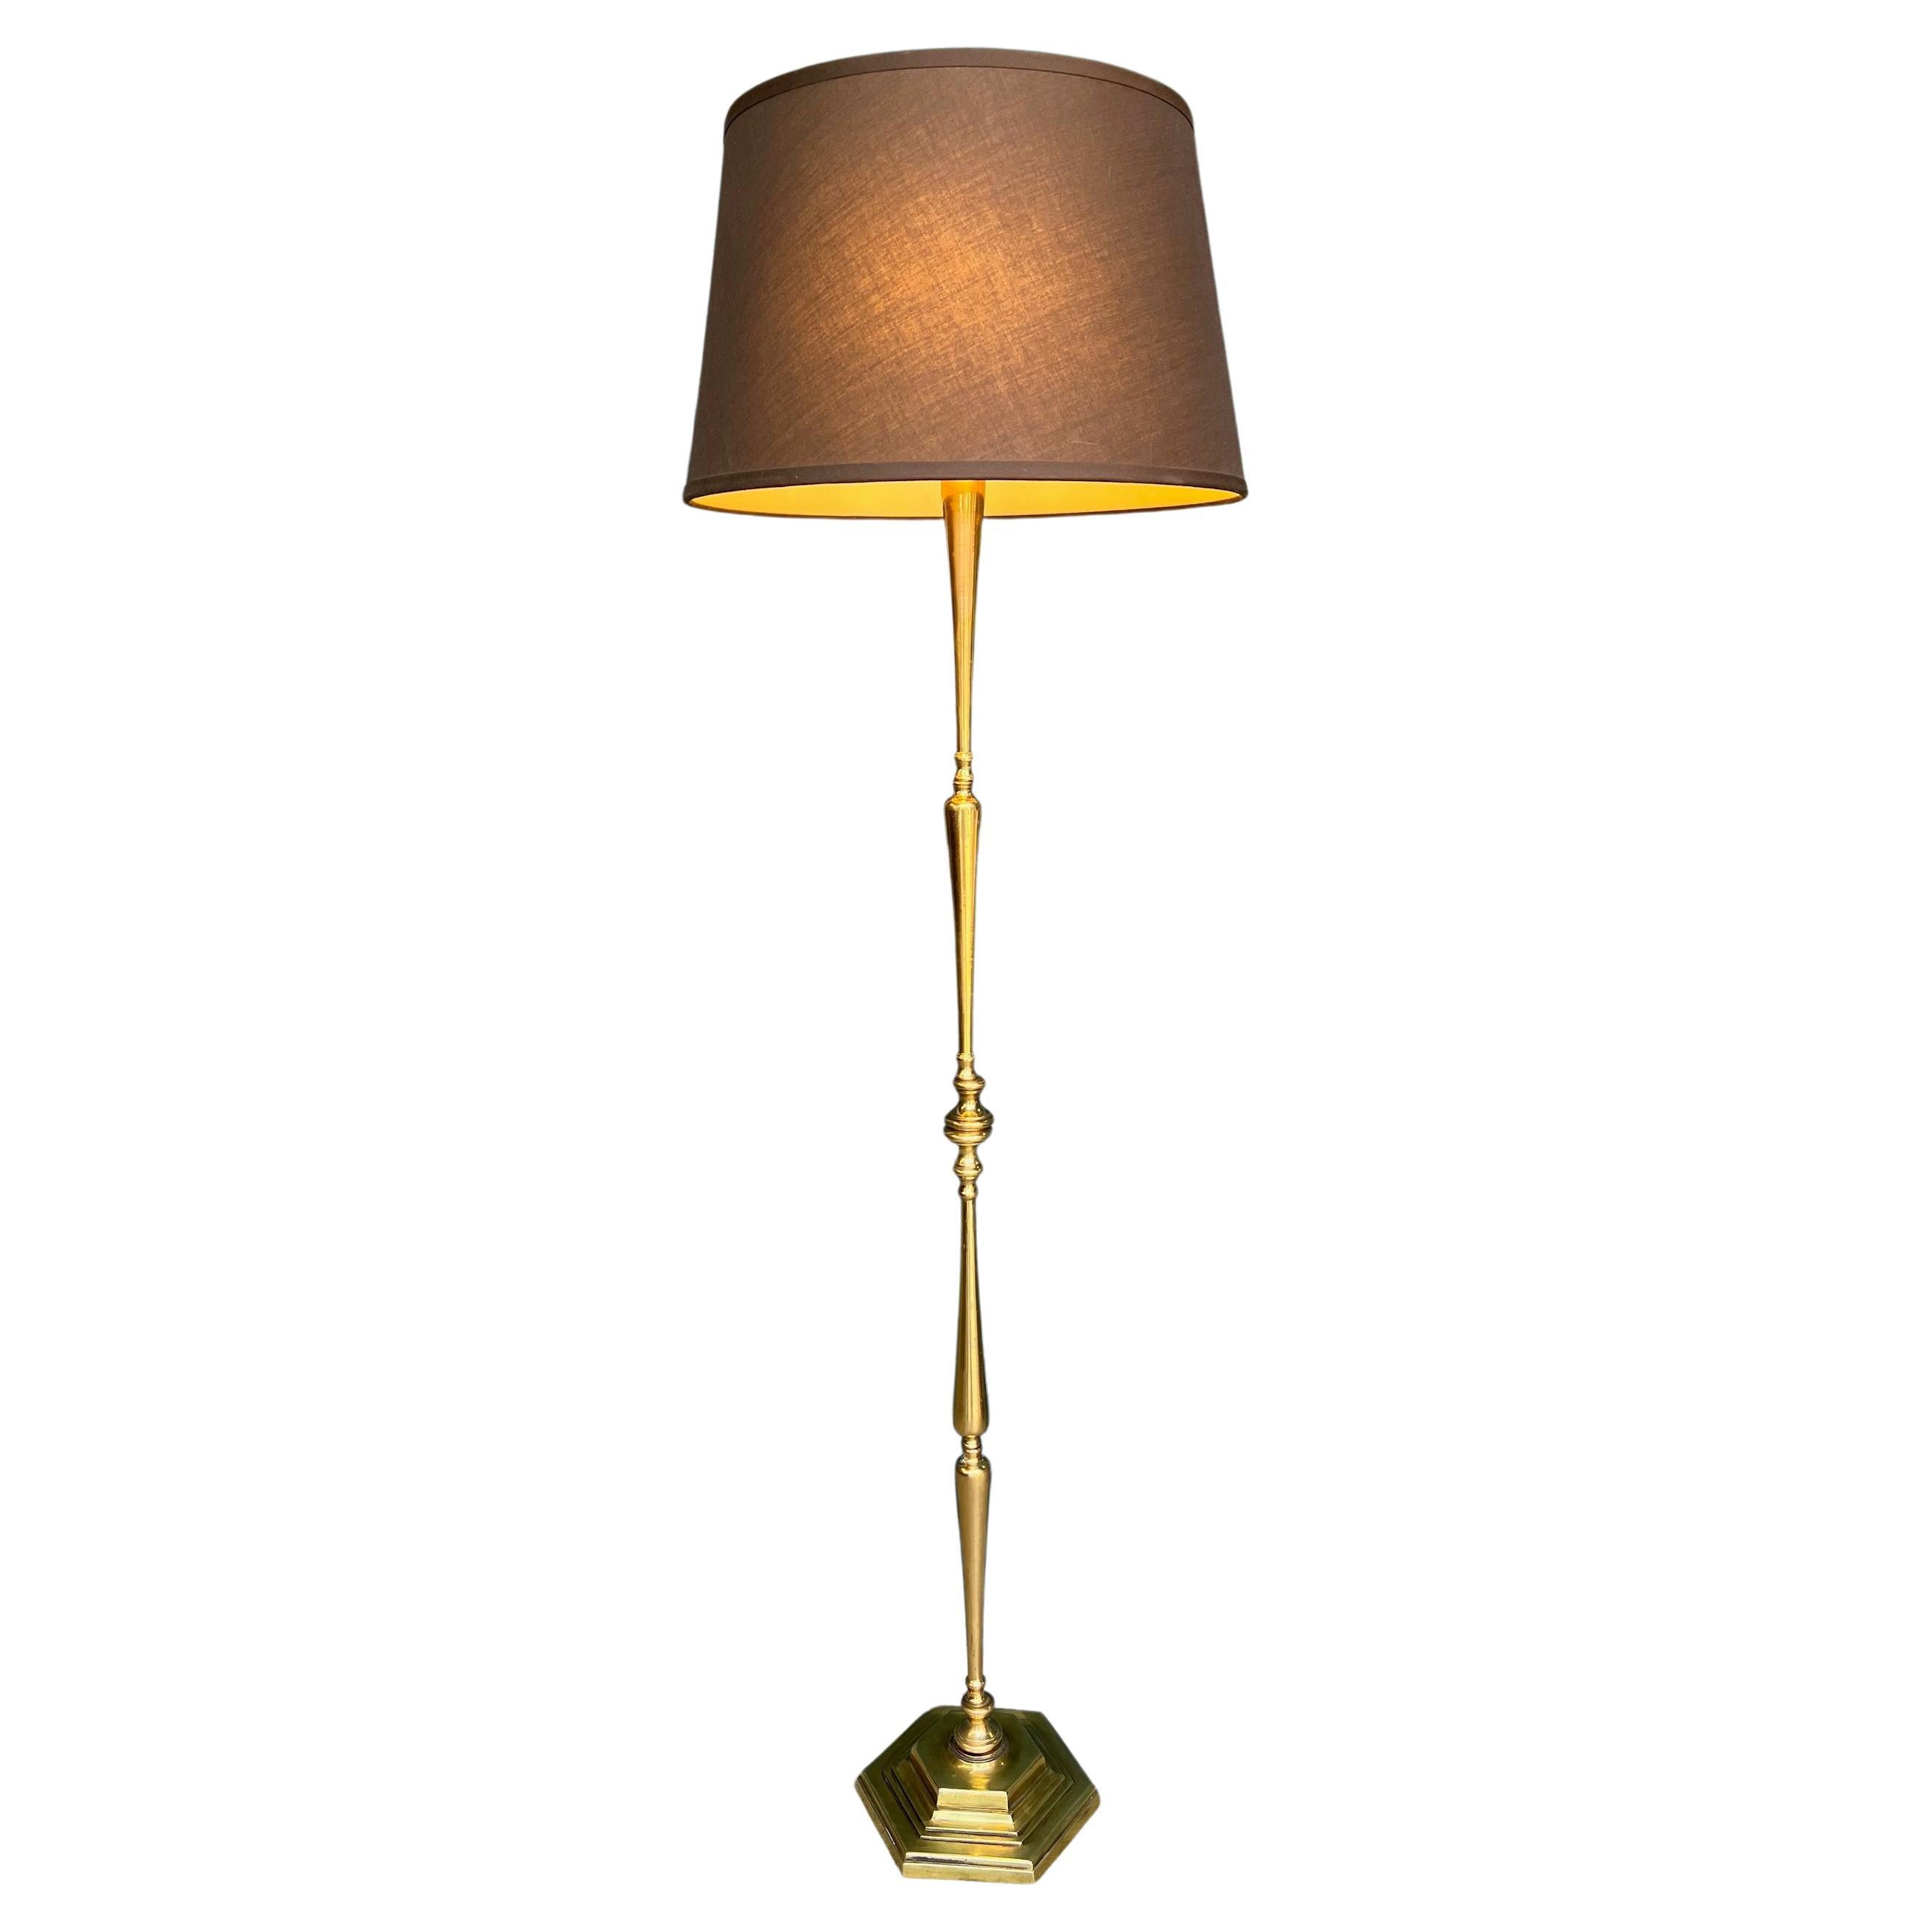 French 1940s Polished Brass Floor Lamp For Sale